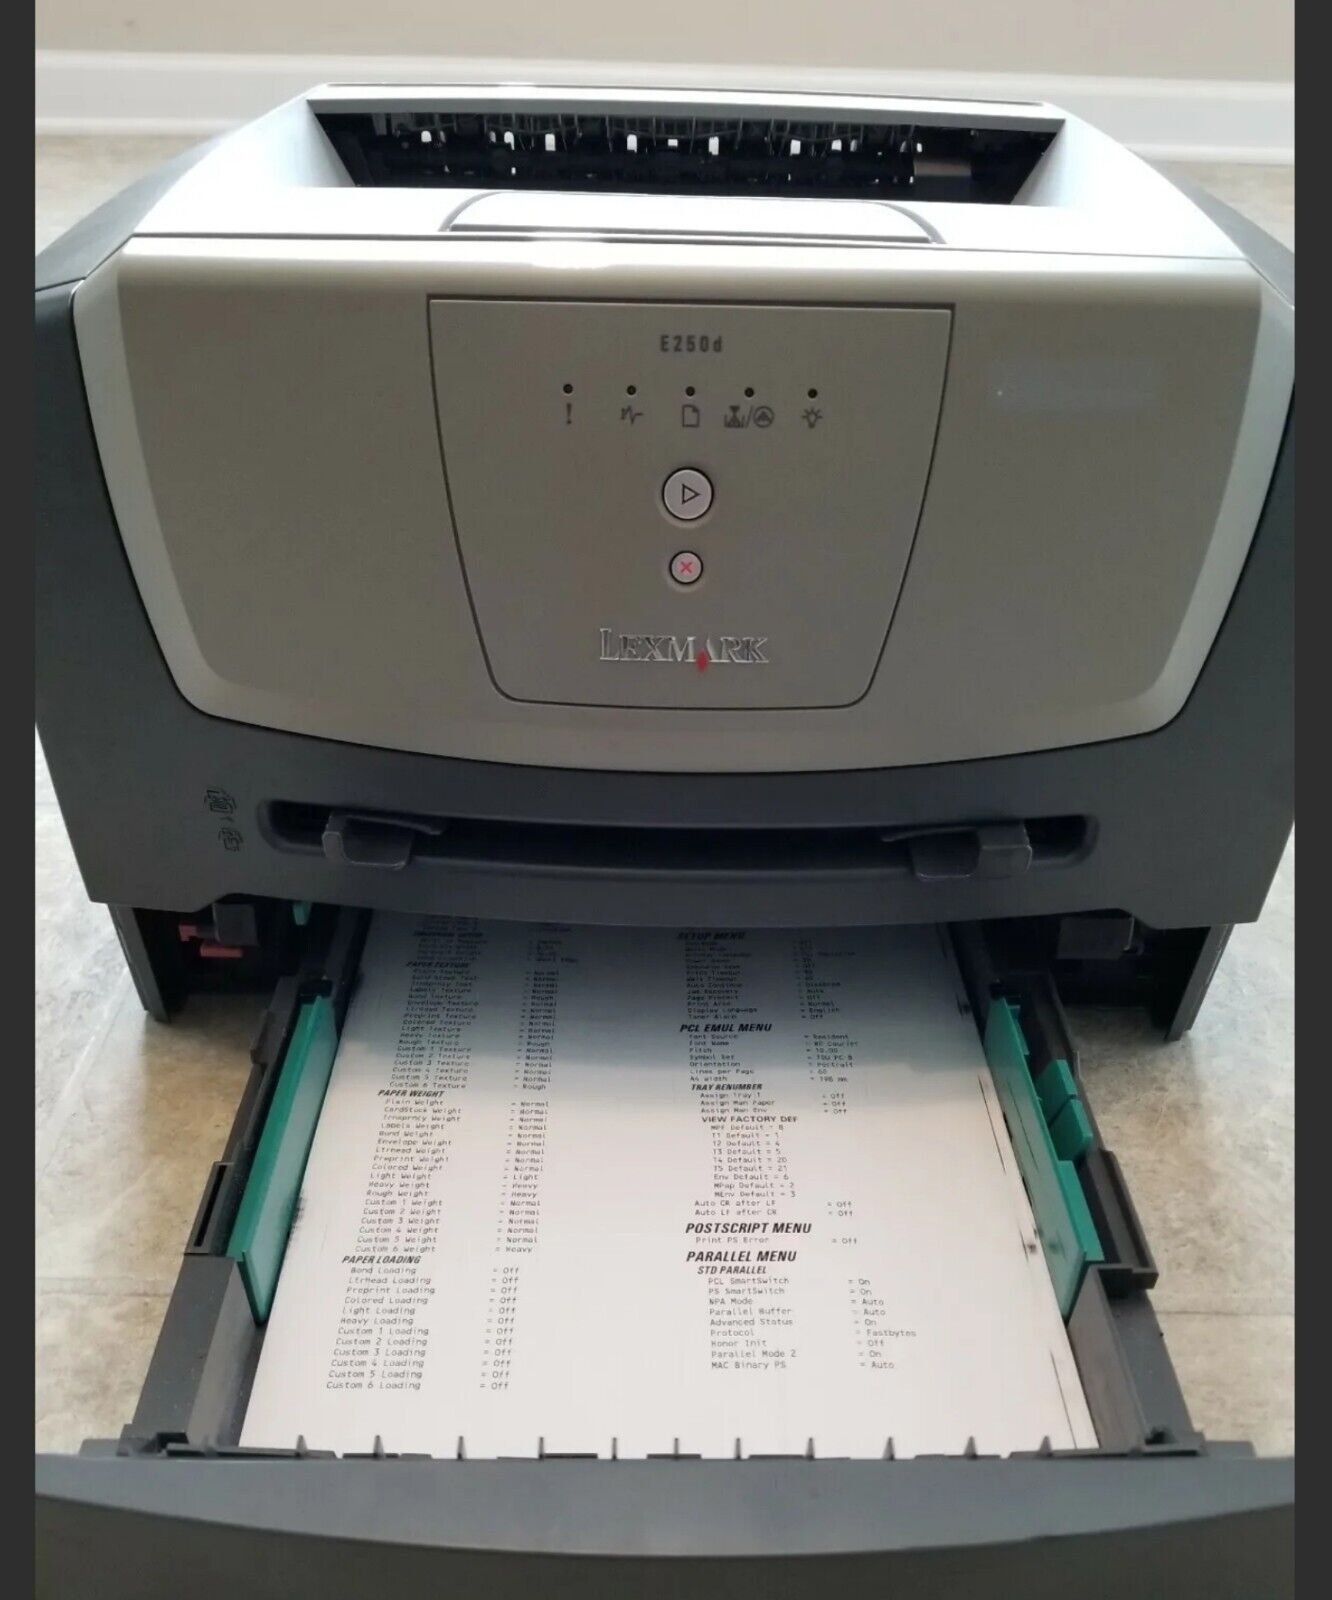 Lexmark E250d Workgroup Laser Printer FULLY FUNCTIONAL VERY CLEAN SEE PICTURES